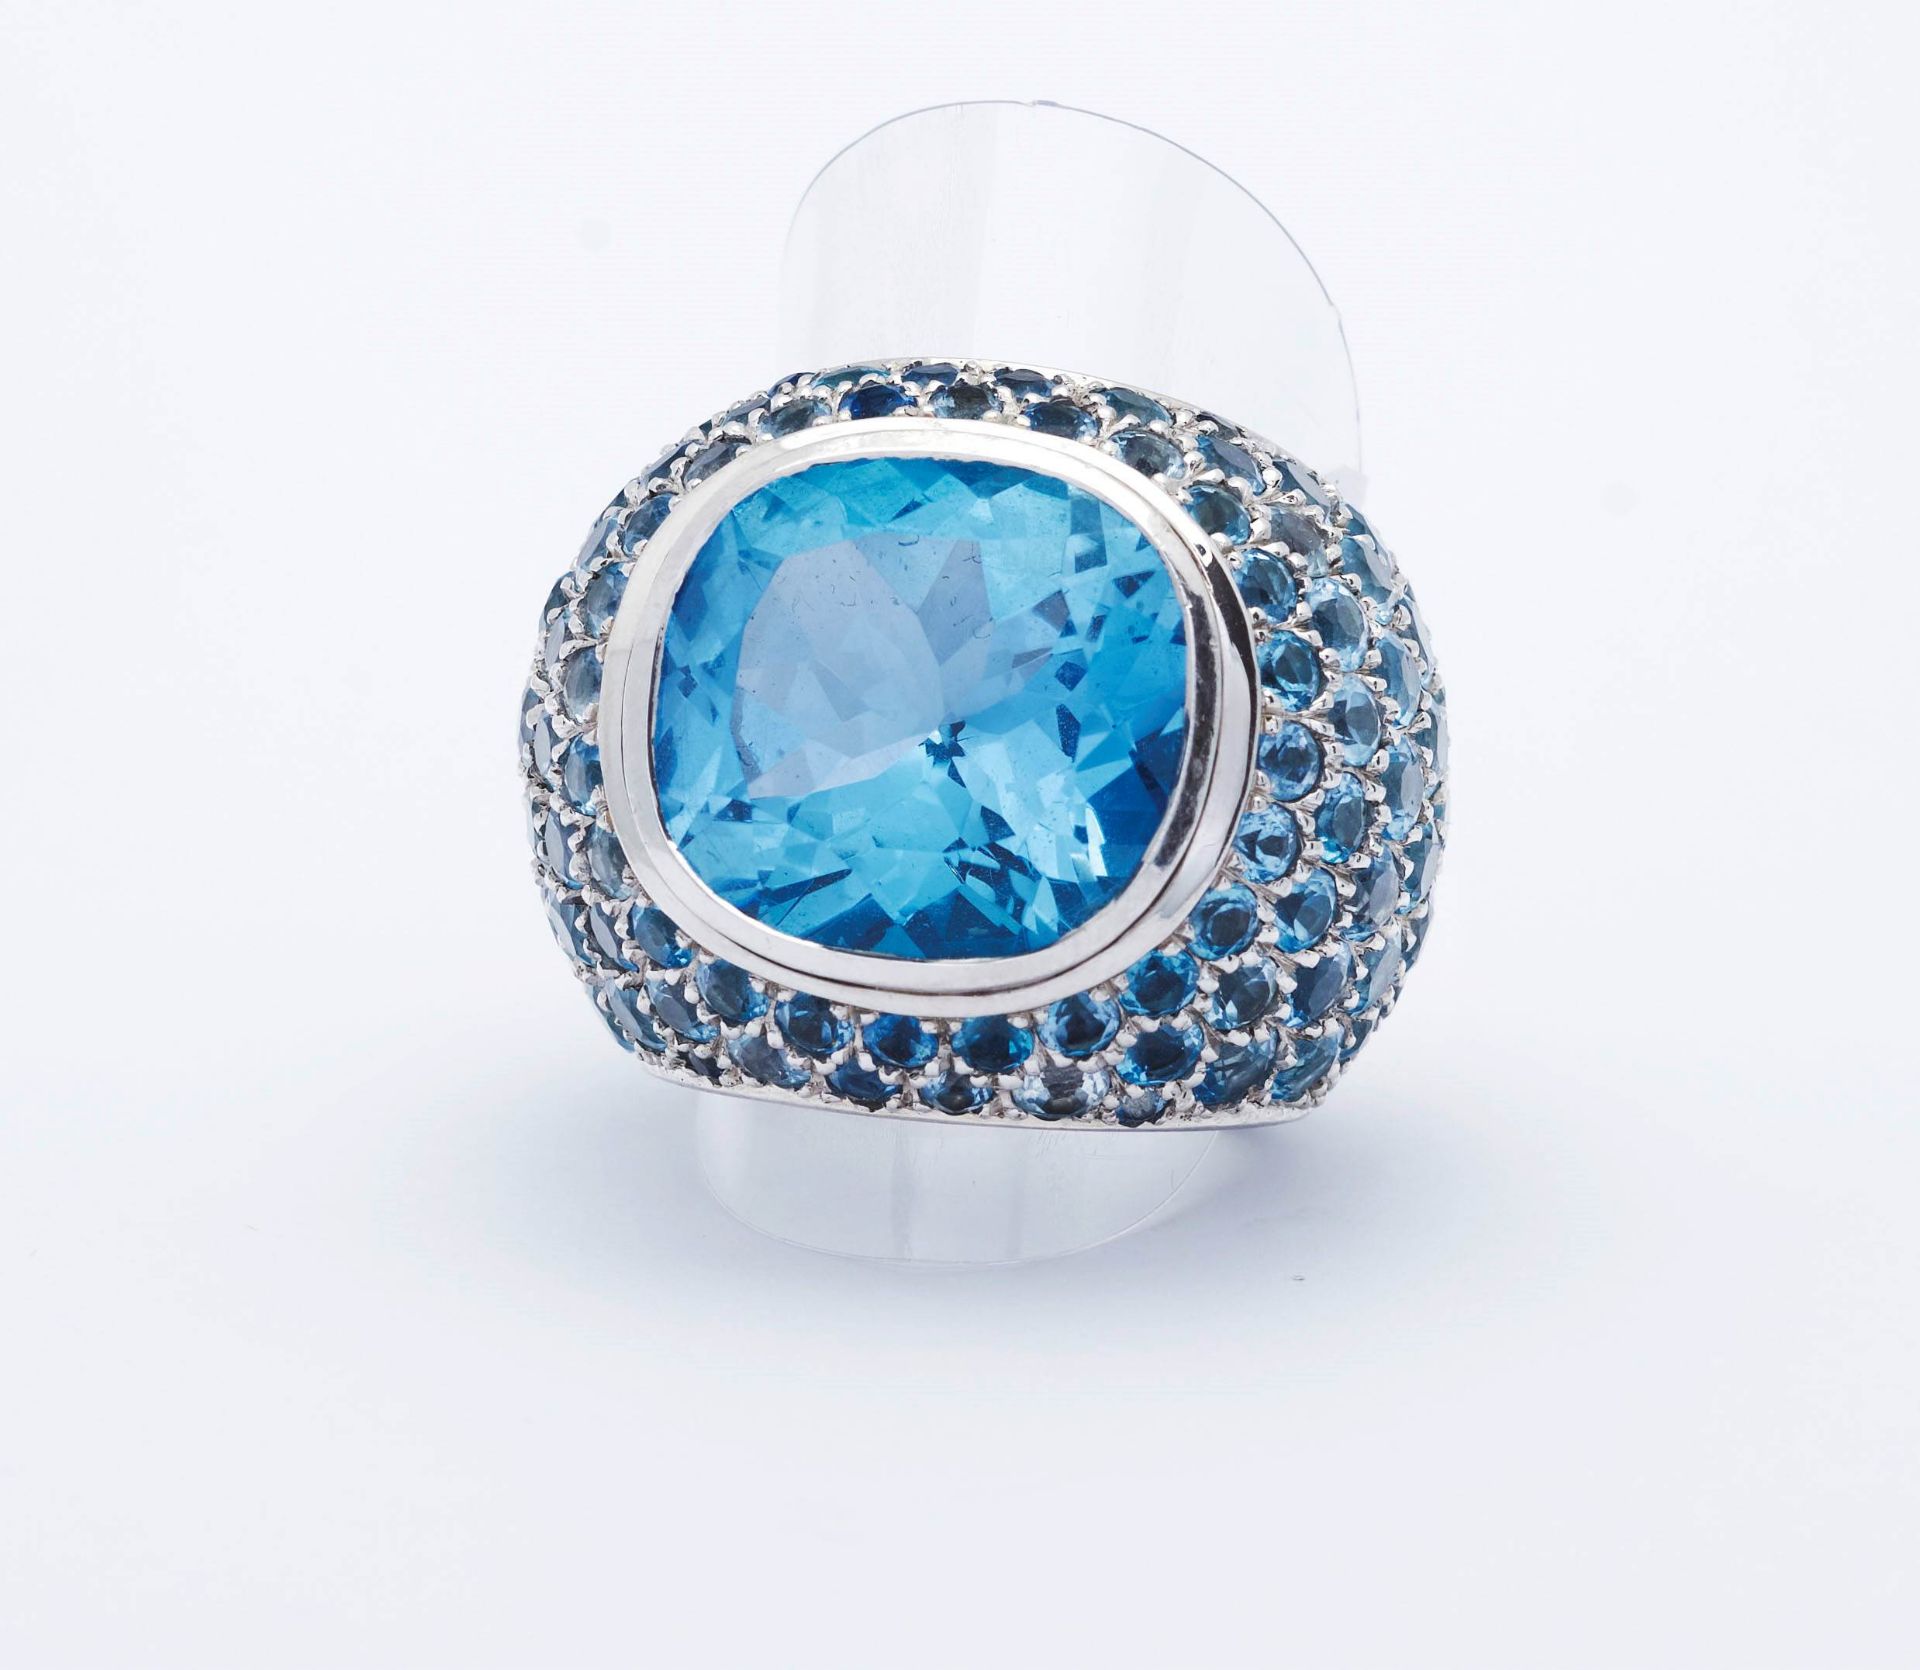 TOPAZ AND GOLD RING, BY MAJO FRUITHOF. - Image 4 of 5